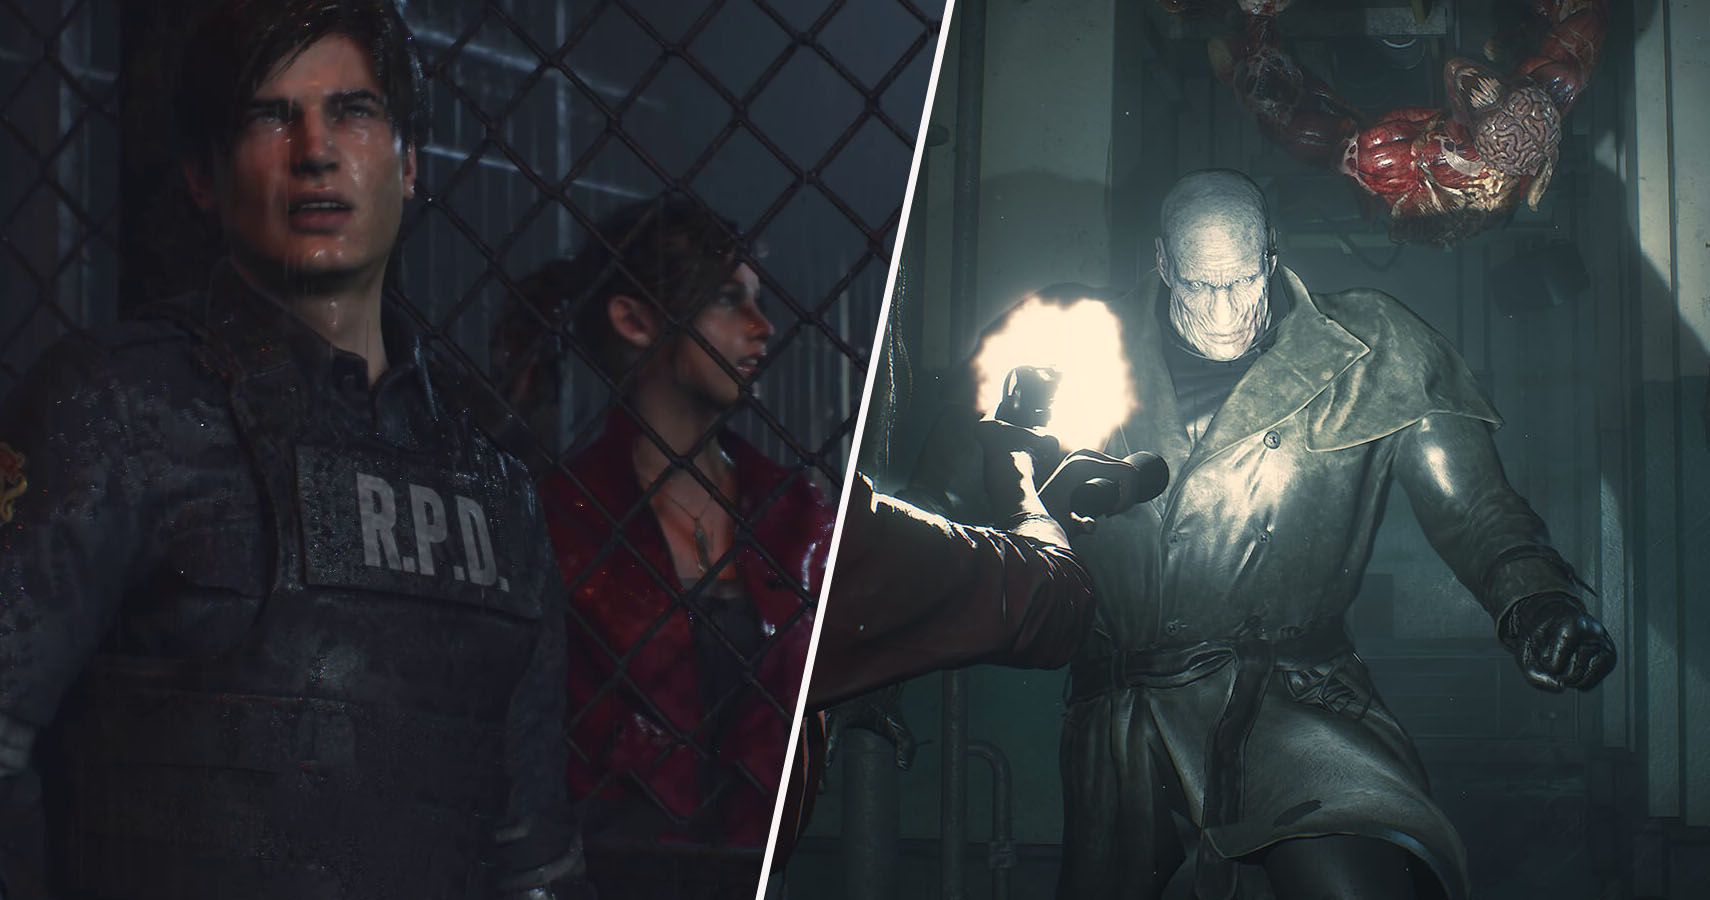 How To Survive Mr. X In Resident Evil 2 